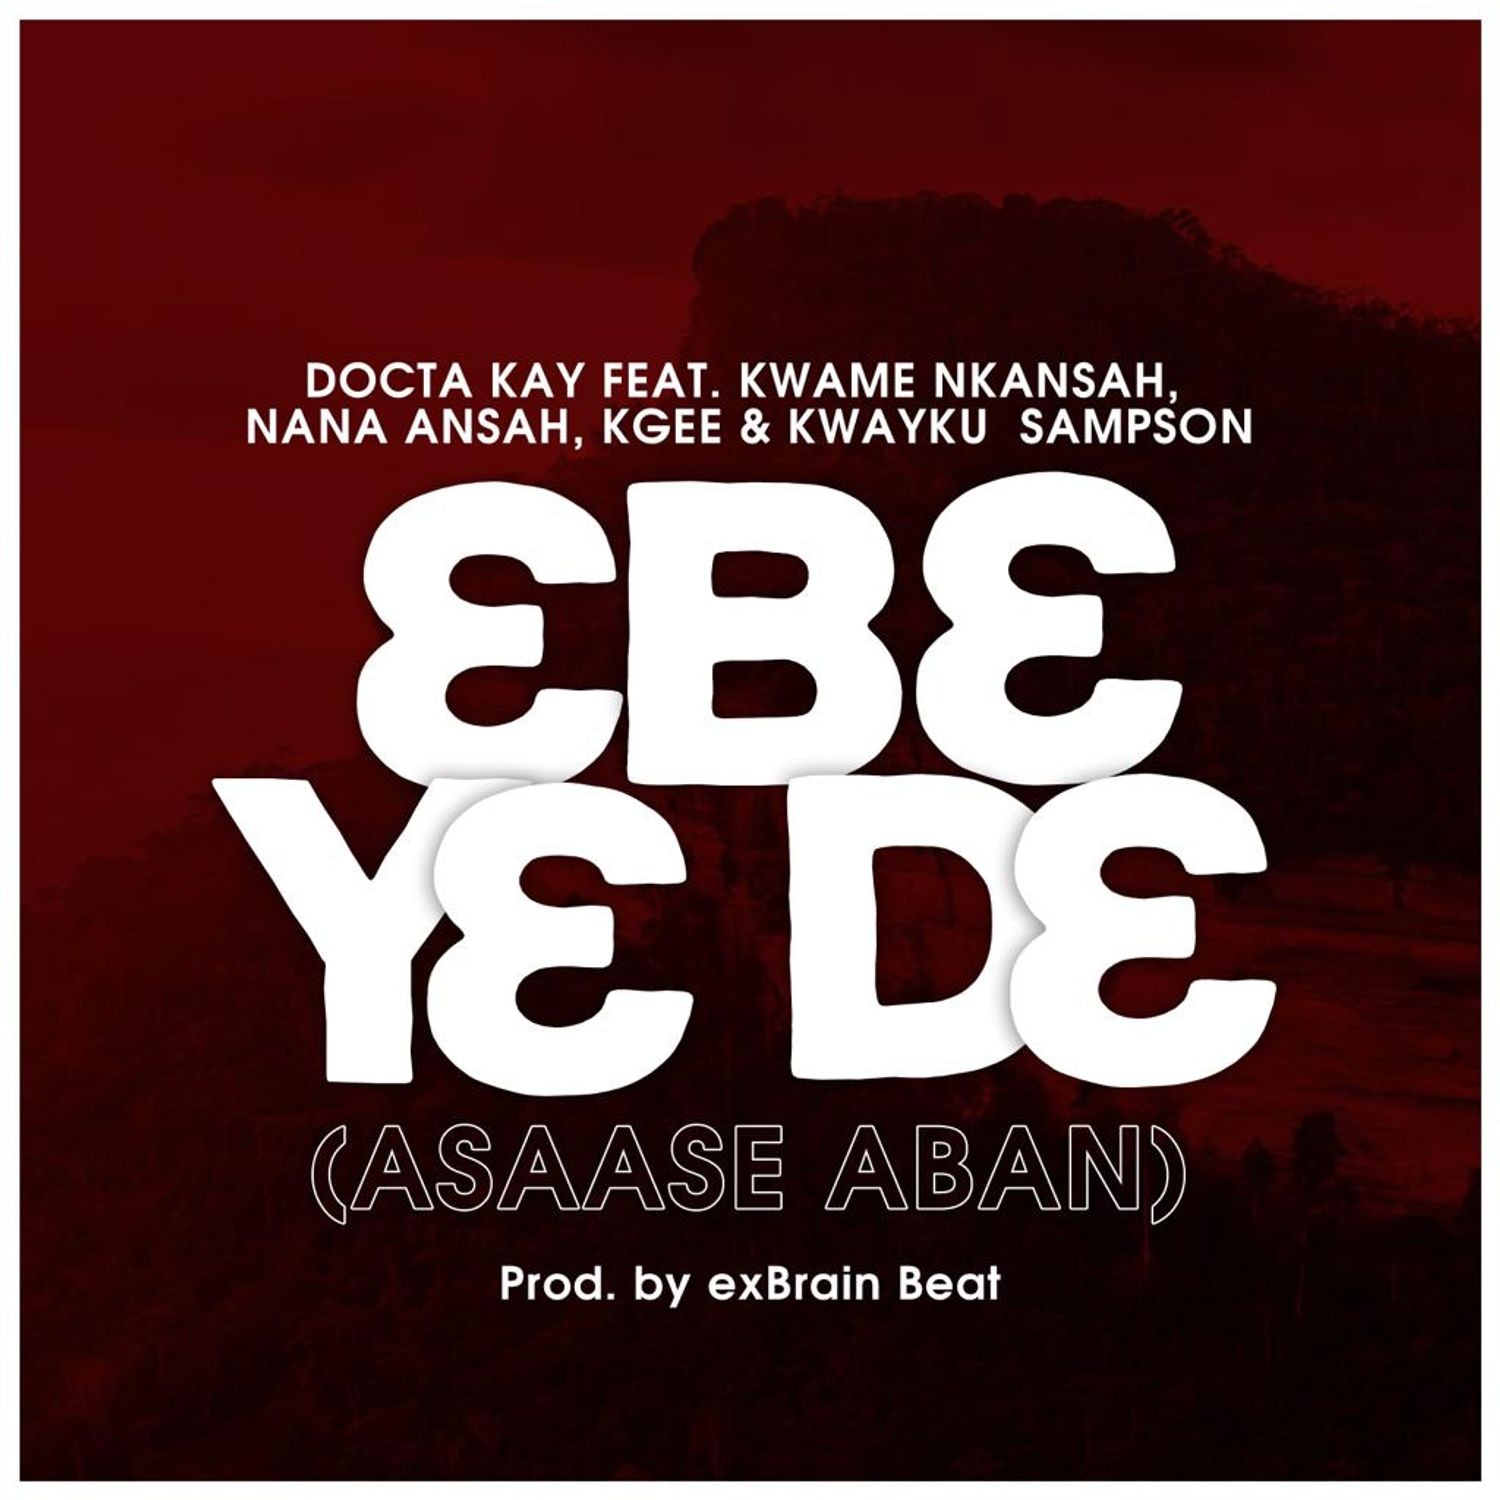 Doctor Kay out with debut single titled Ebe Ye De